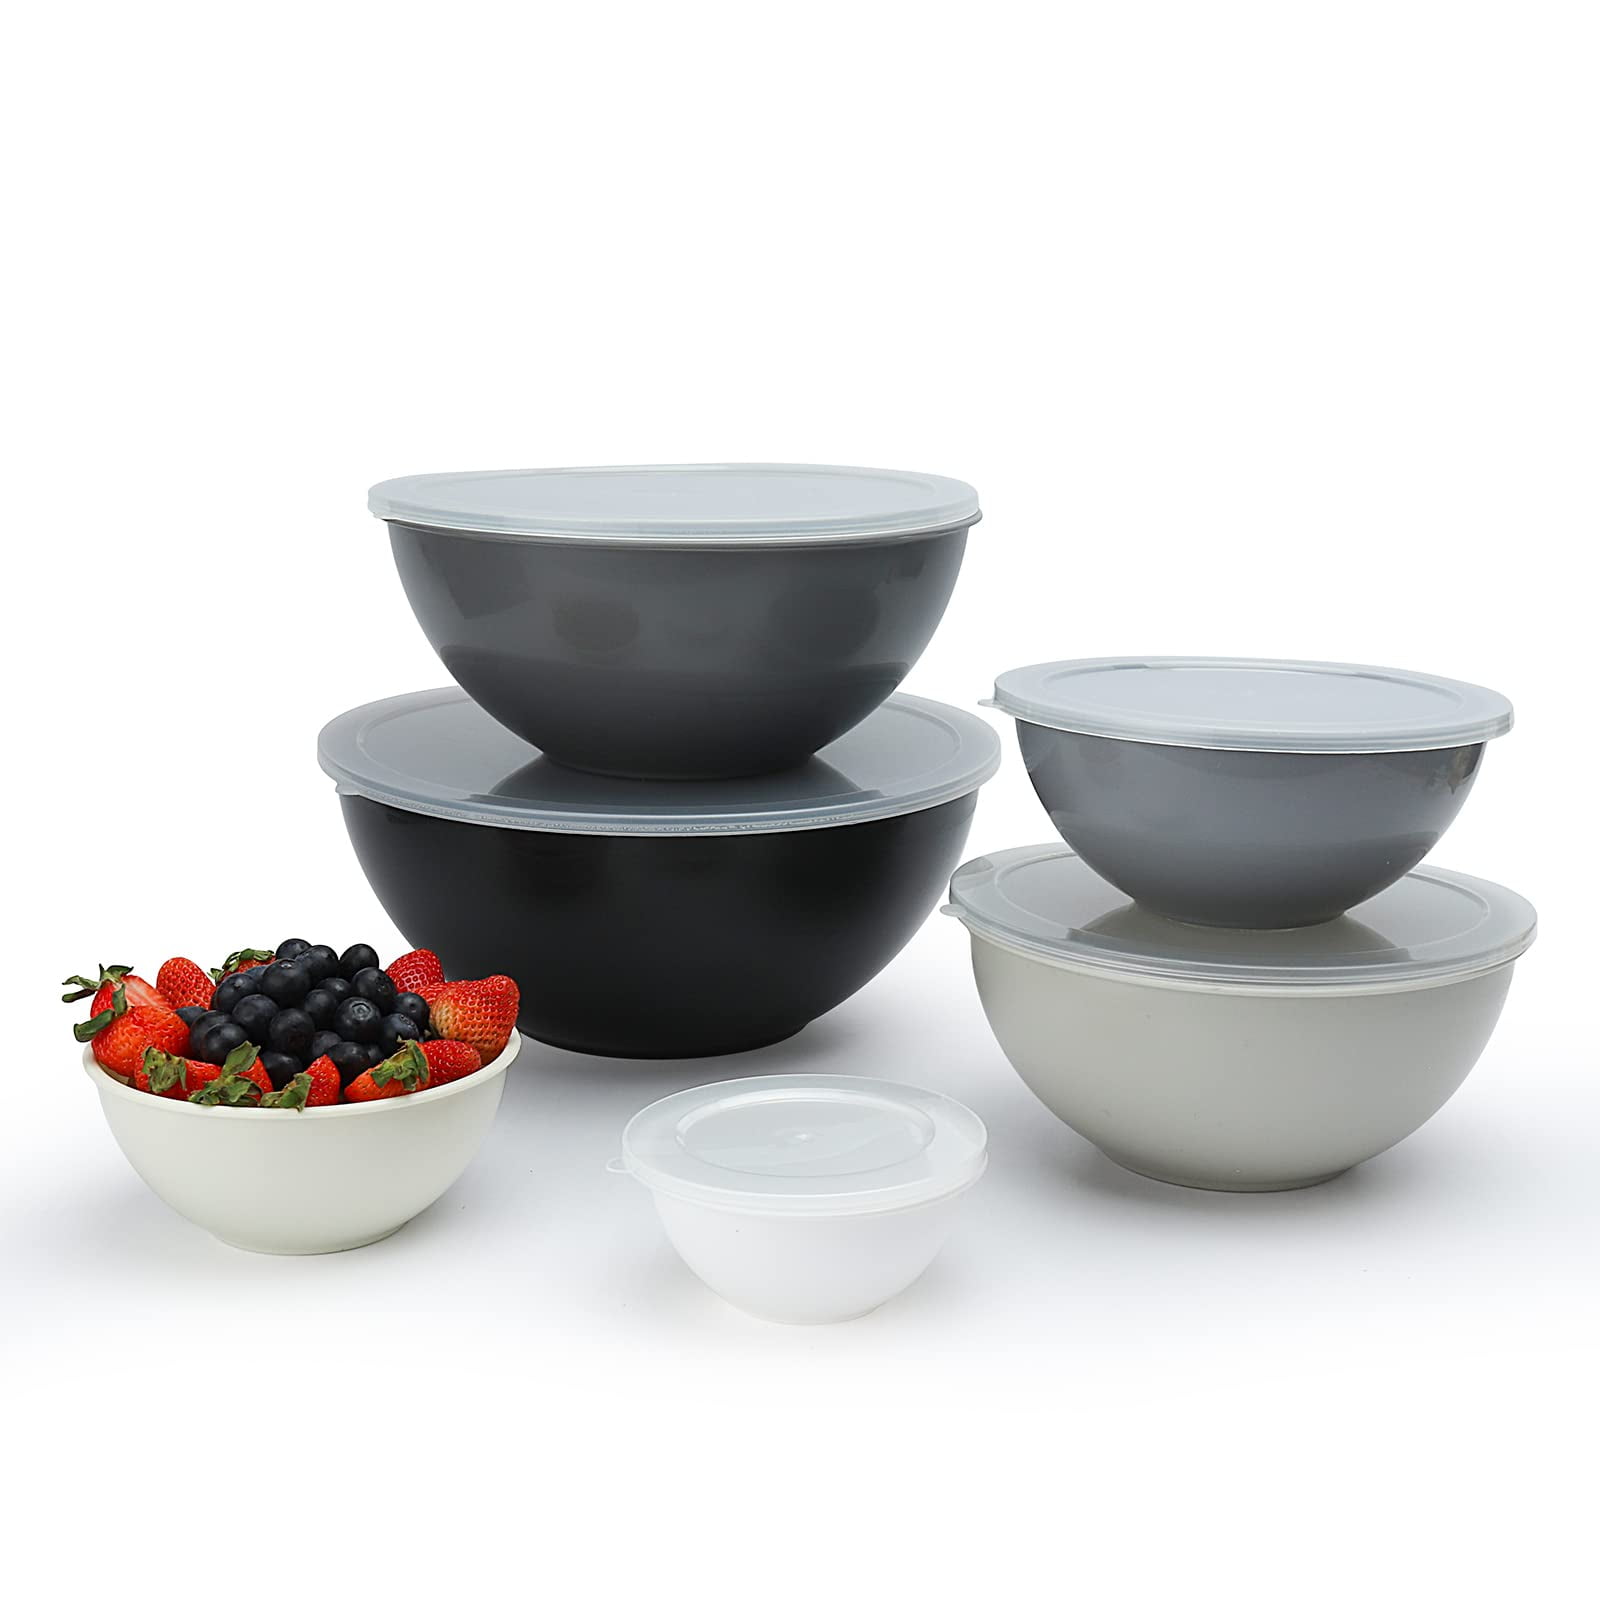 Mixing Bowls Set of 3 Ceramic Bowls with Lid Cow Pattern Ceramic Lunch Bento Boxes/Food Carrier/Food Storage & Organization Container With Lid 